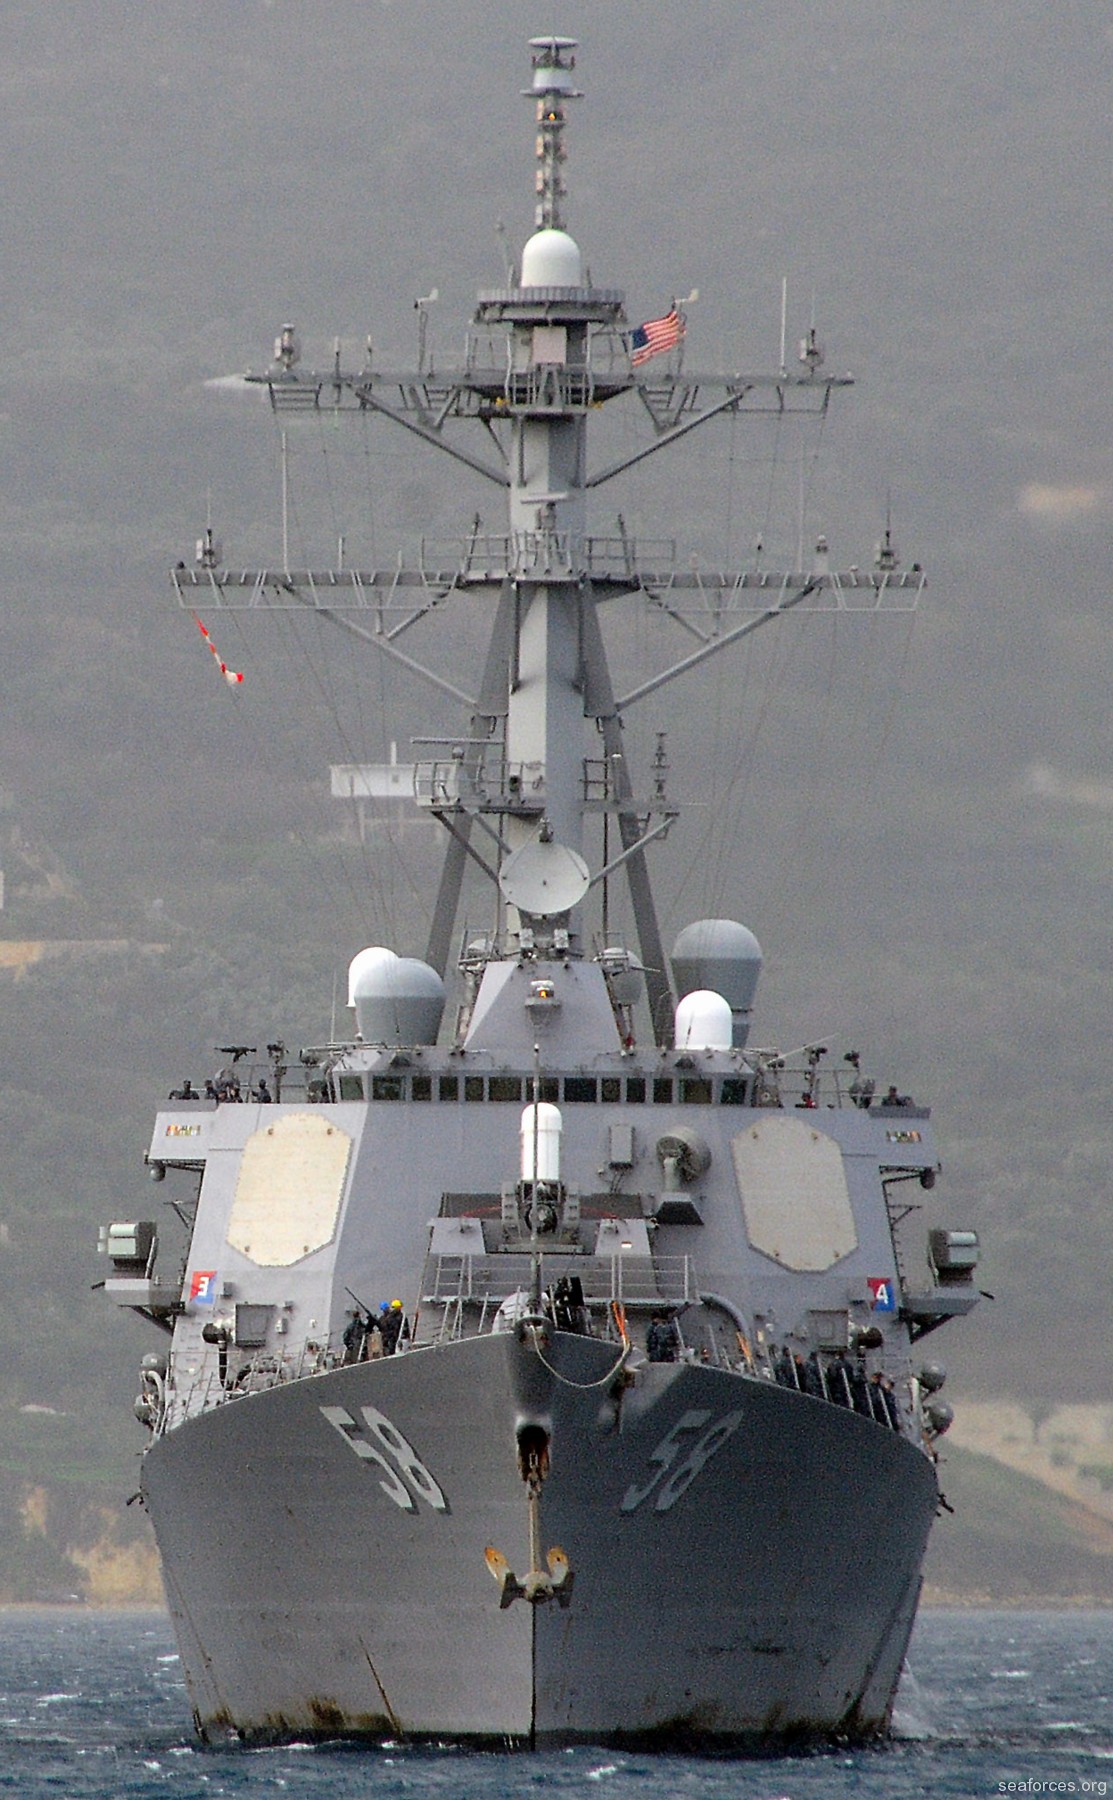 ddg-58 uss laboon guided missile destroyer us navy 59